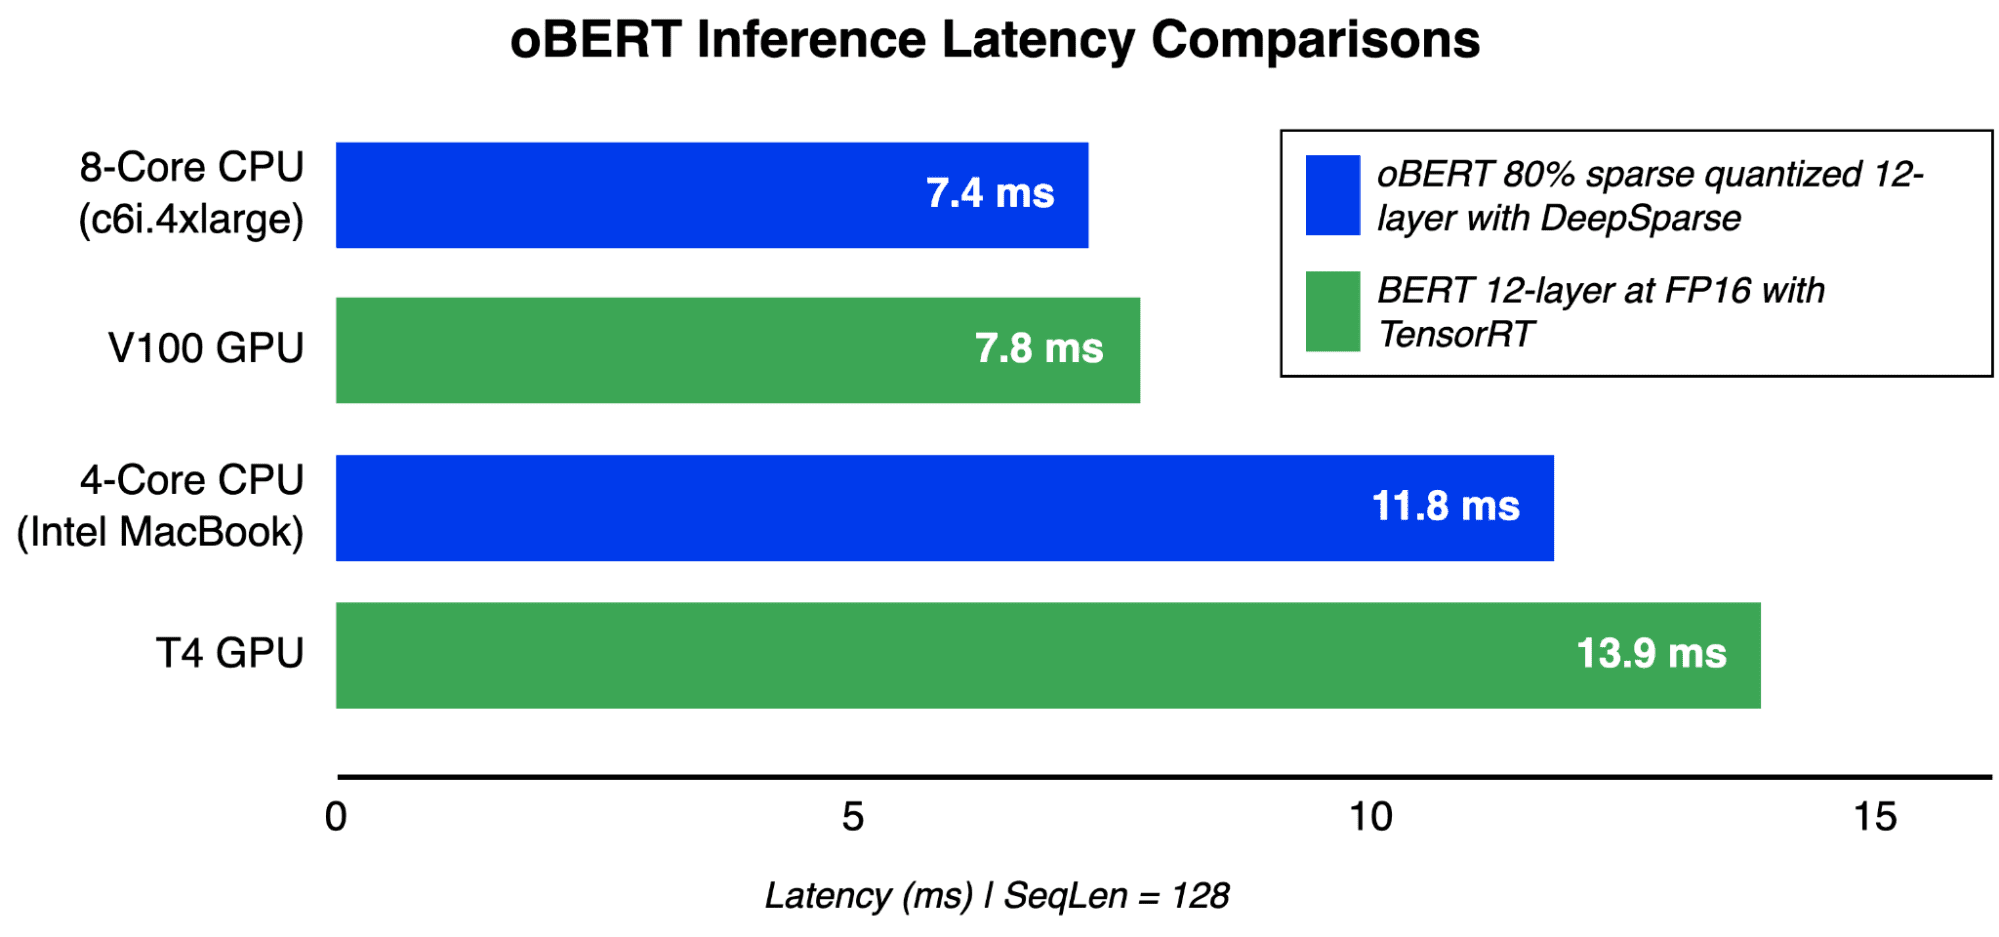 Latency inference comparisons at batch size 1, sequence length 128 for oBERT on CPUs and GPUs.